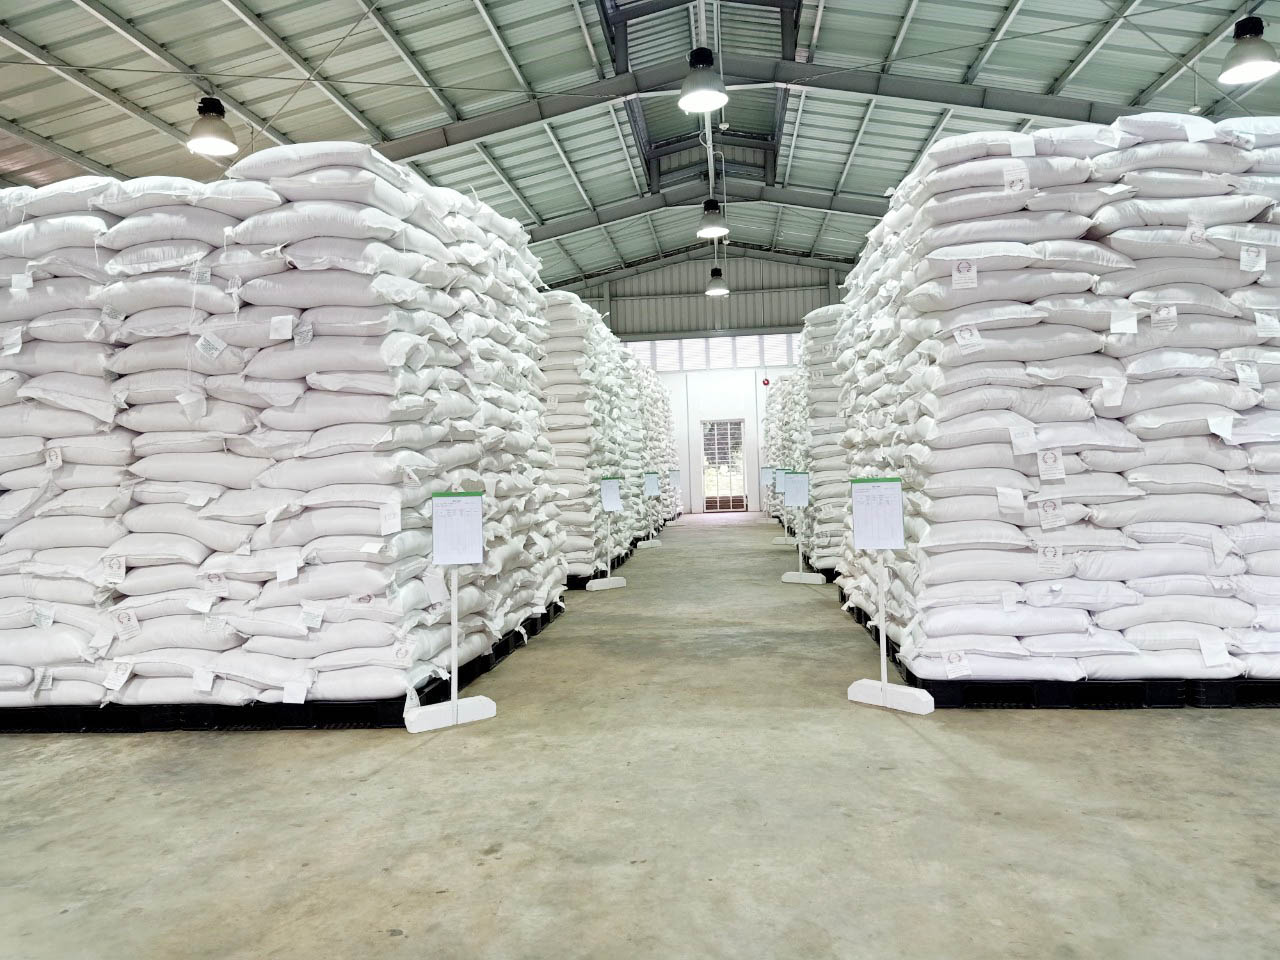 Suppliers of grains in Africa, Middle East & Asia